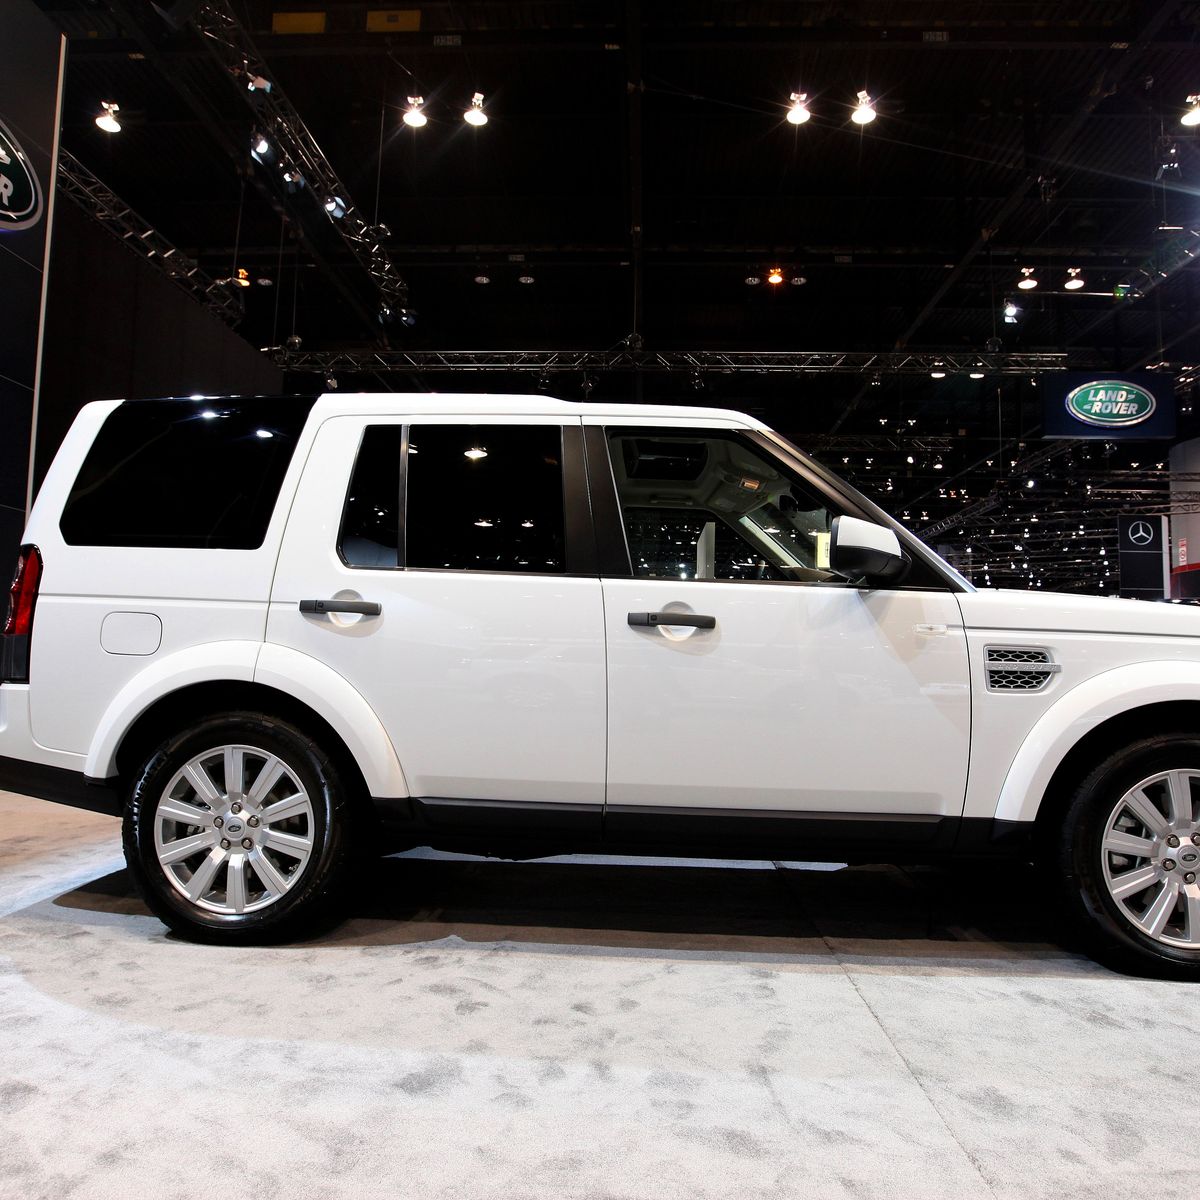 https://hips.hearstapps.com/hmg-prod/images/land-rover-lr4-at-the-105th-annual-chicago-auto-show-at-news-photo-1637268655.jpg?crop=0.66667xw:1xh;center,top&resize=1200:*